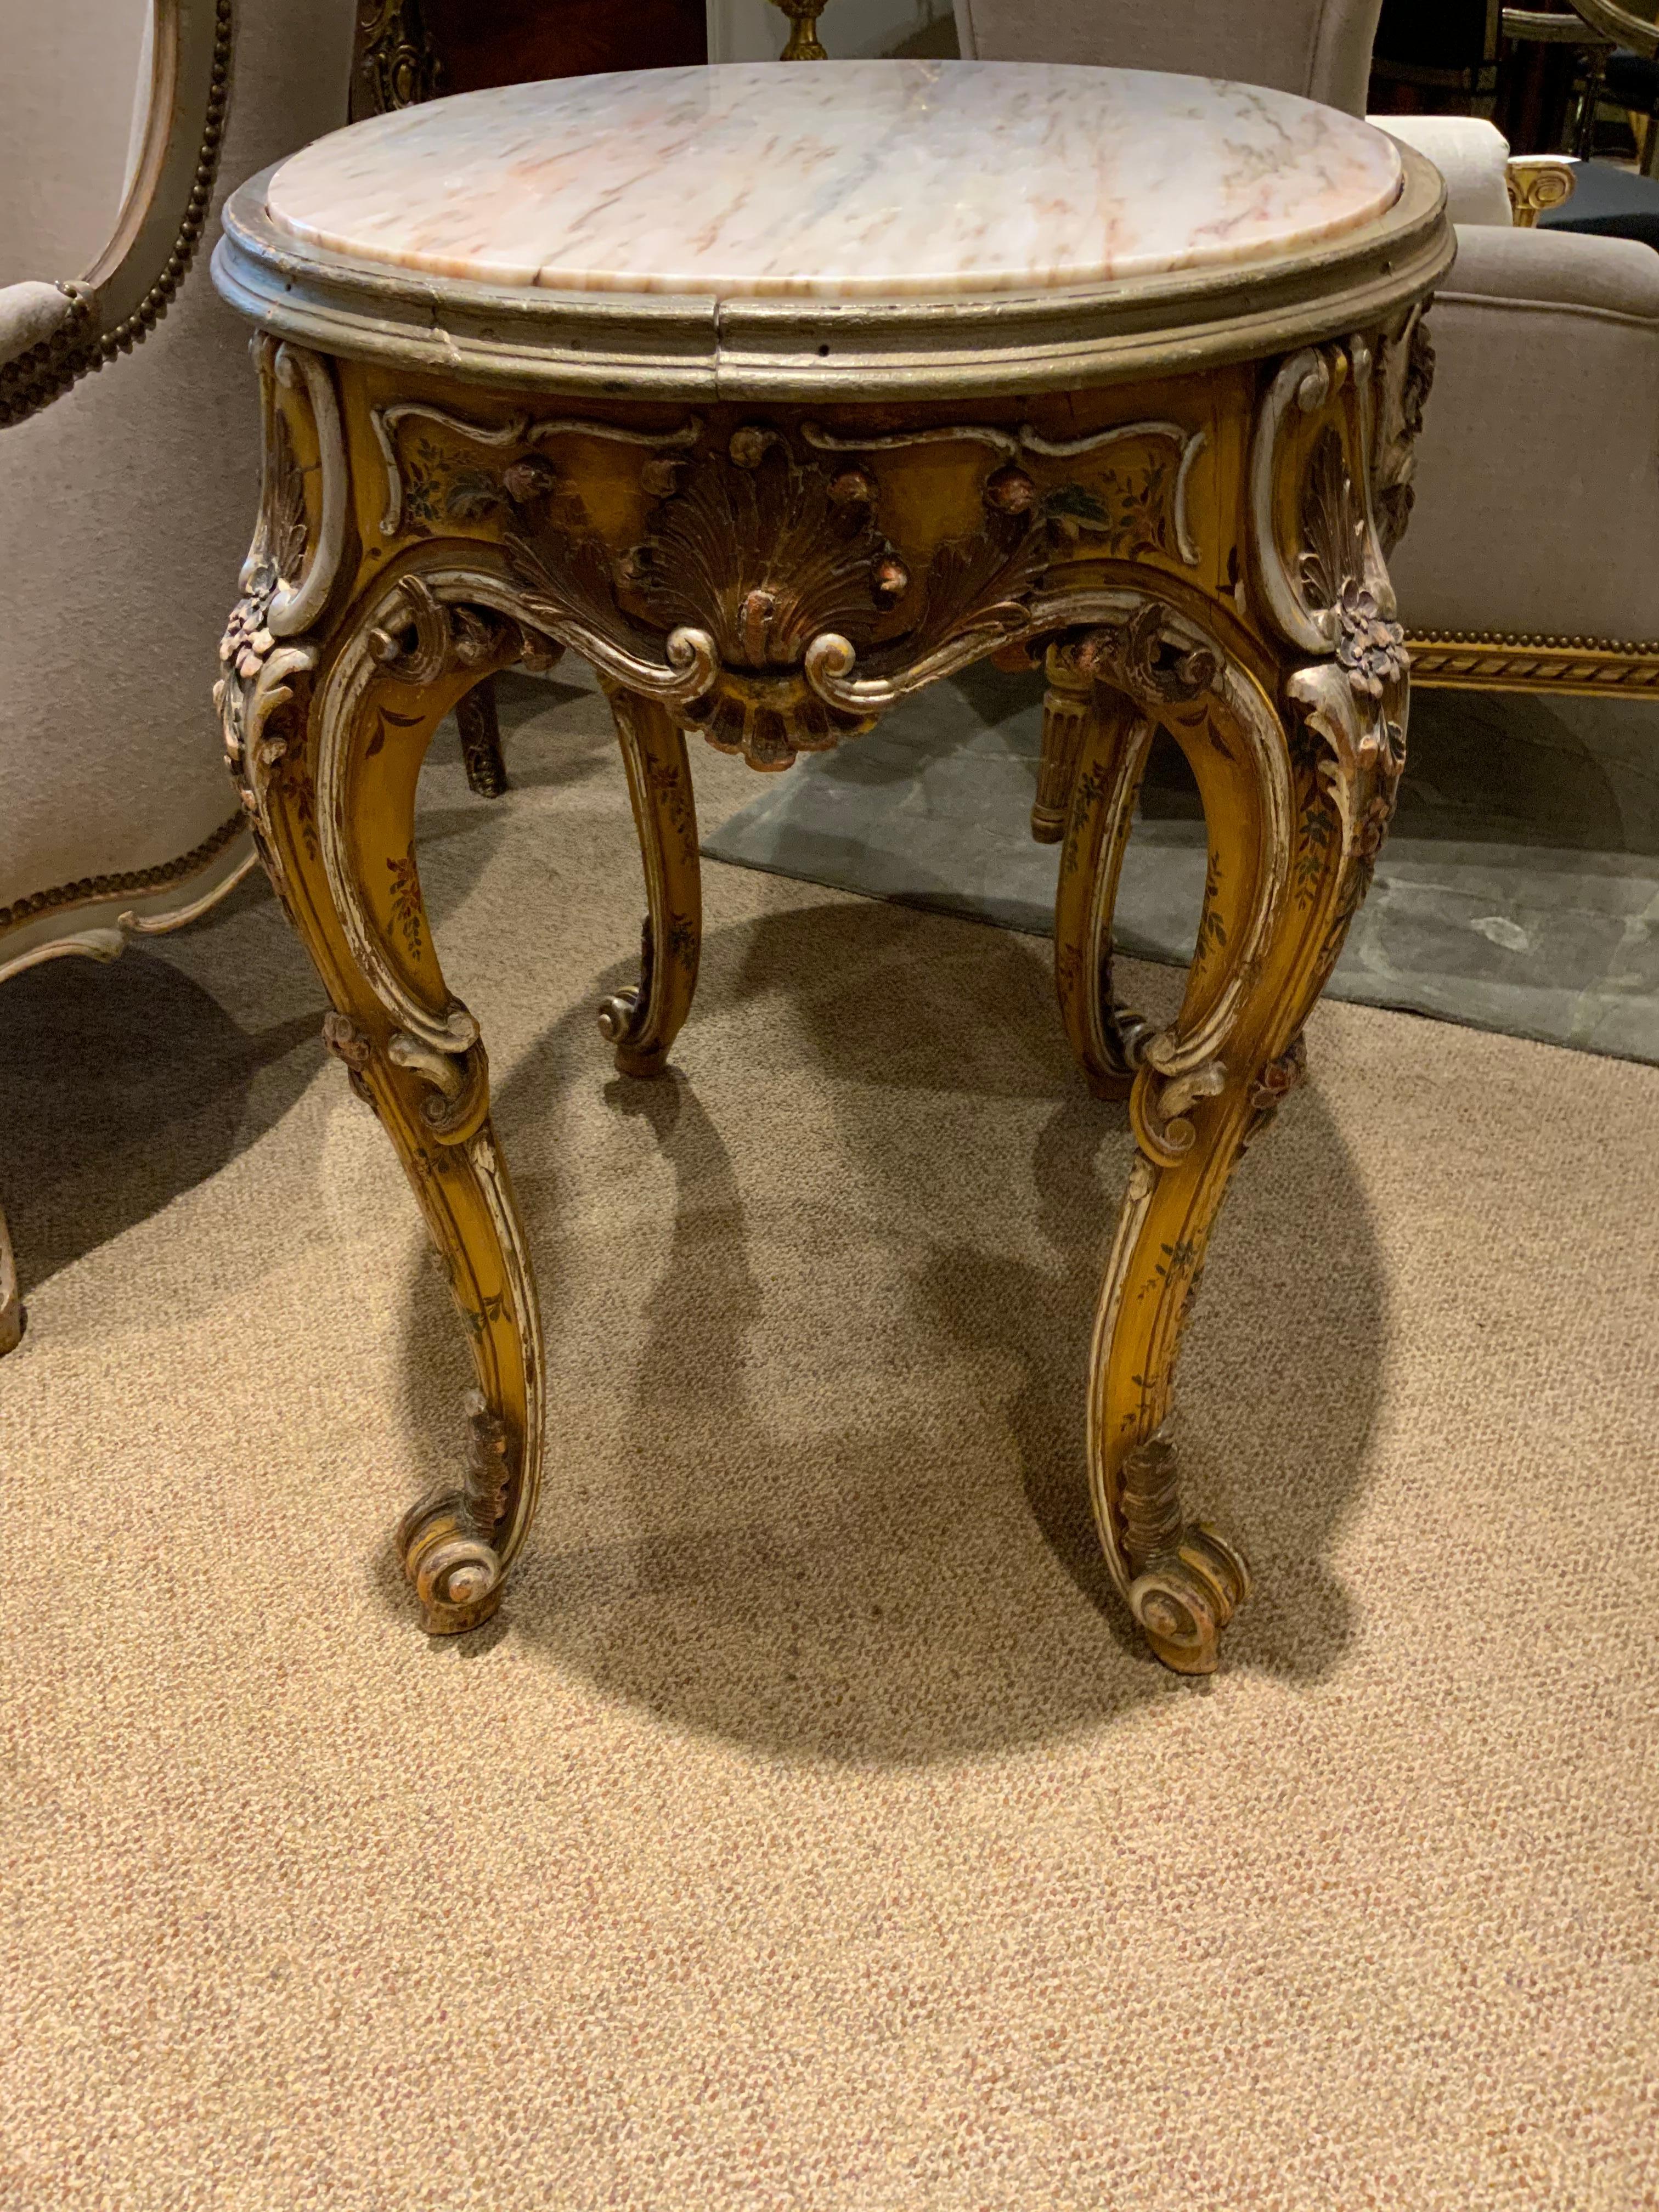 Harewood Oval Venetian Carved and Polychrome Table with a Cream, Gold and Pale Gray Veins For Sale